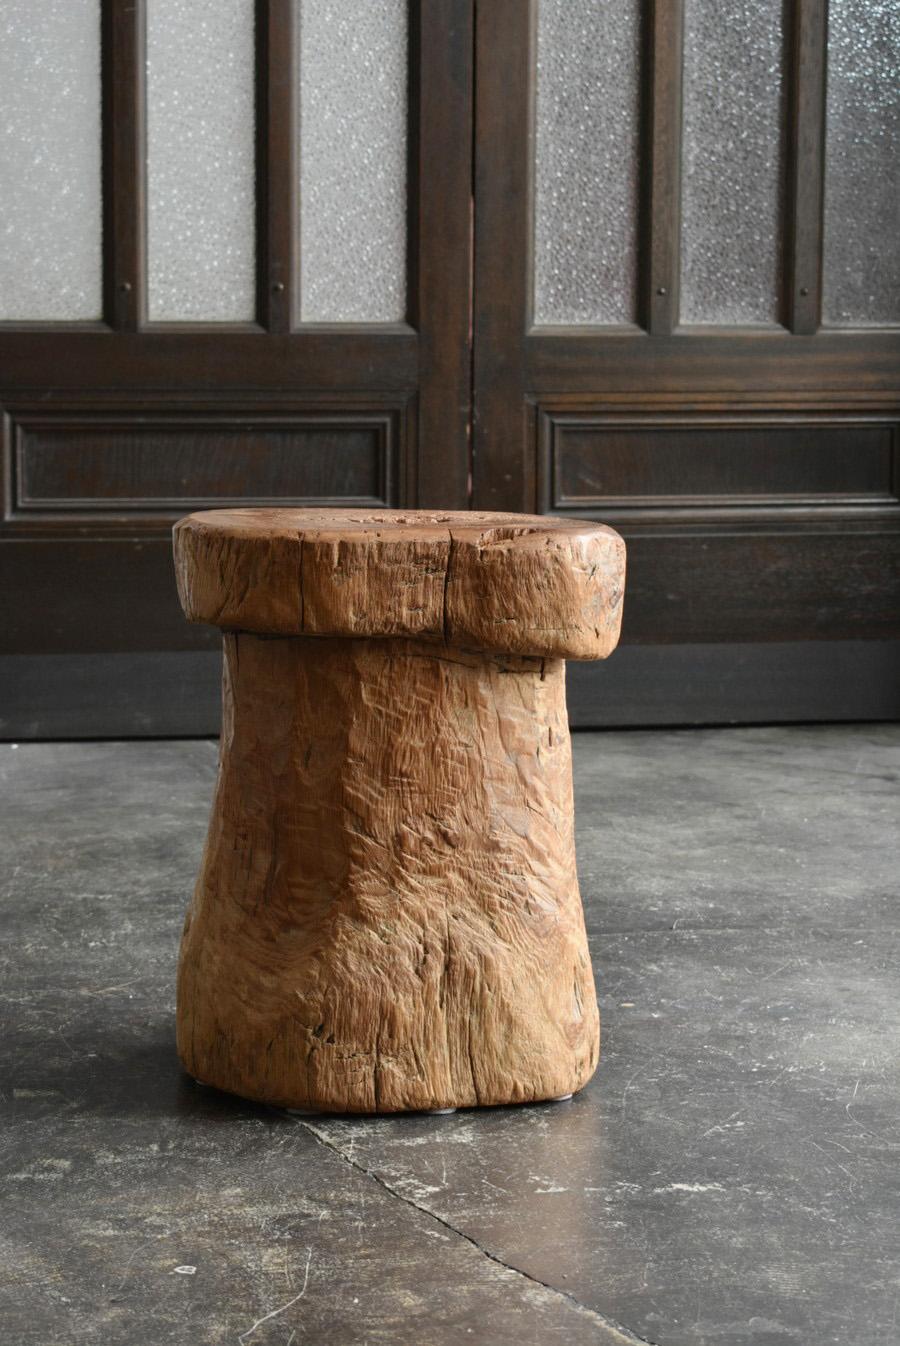 Other Indonesian Mushroom-Shaped Old Stool/Primitive Design/early 20th century/Stock A